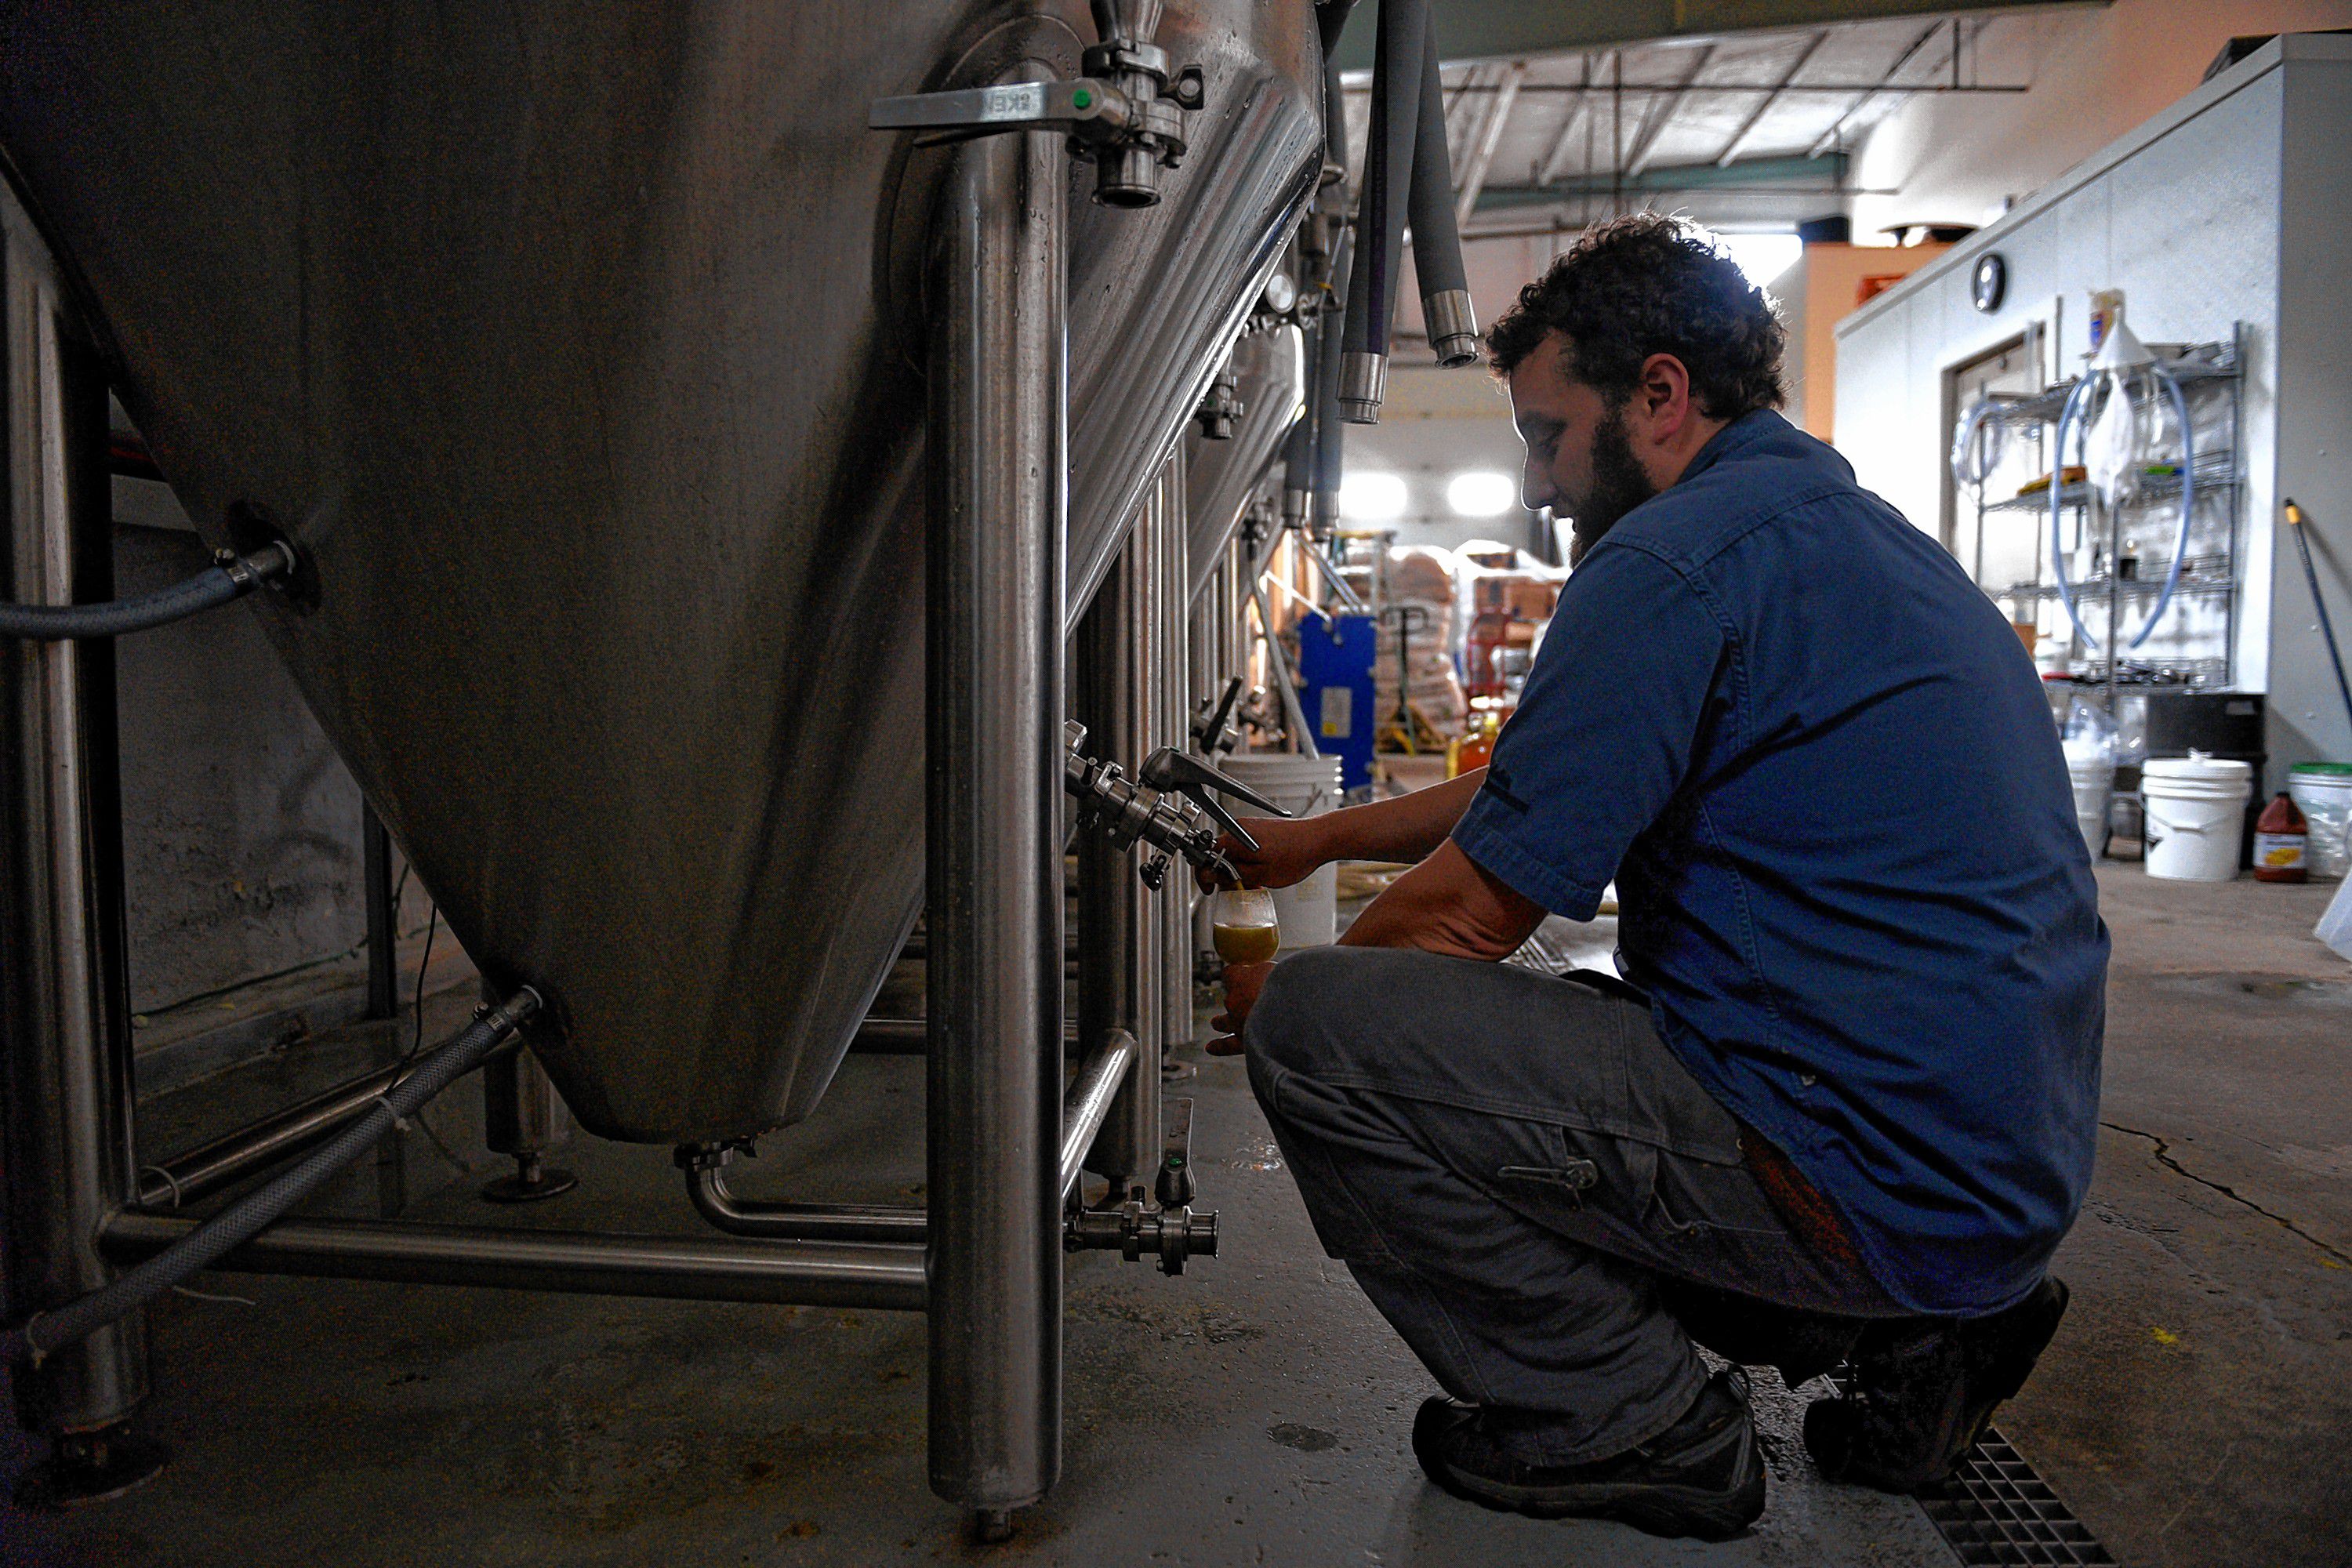 Mark Babson of River Roost Brewery checks on a recently made beer at the brewery on Sept. 14, 2016, in White River Junction, Vt. (Valley News - Jennifer Hauck) Copyright Valley News. May not be reprinted or used online without permission. Send requests to permission@vnews.com.